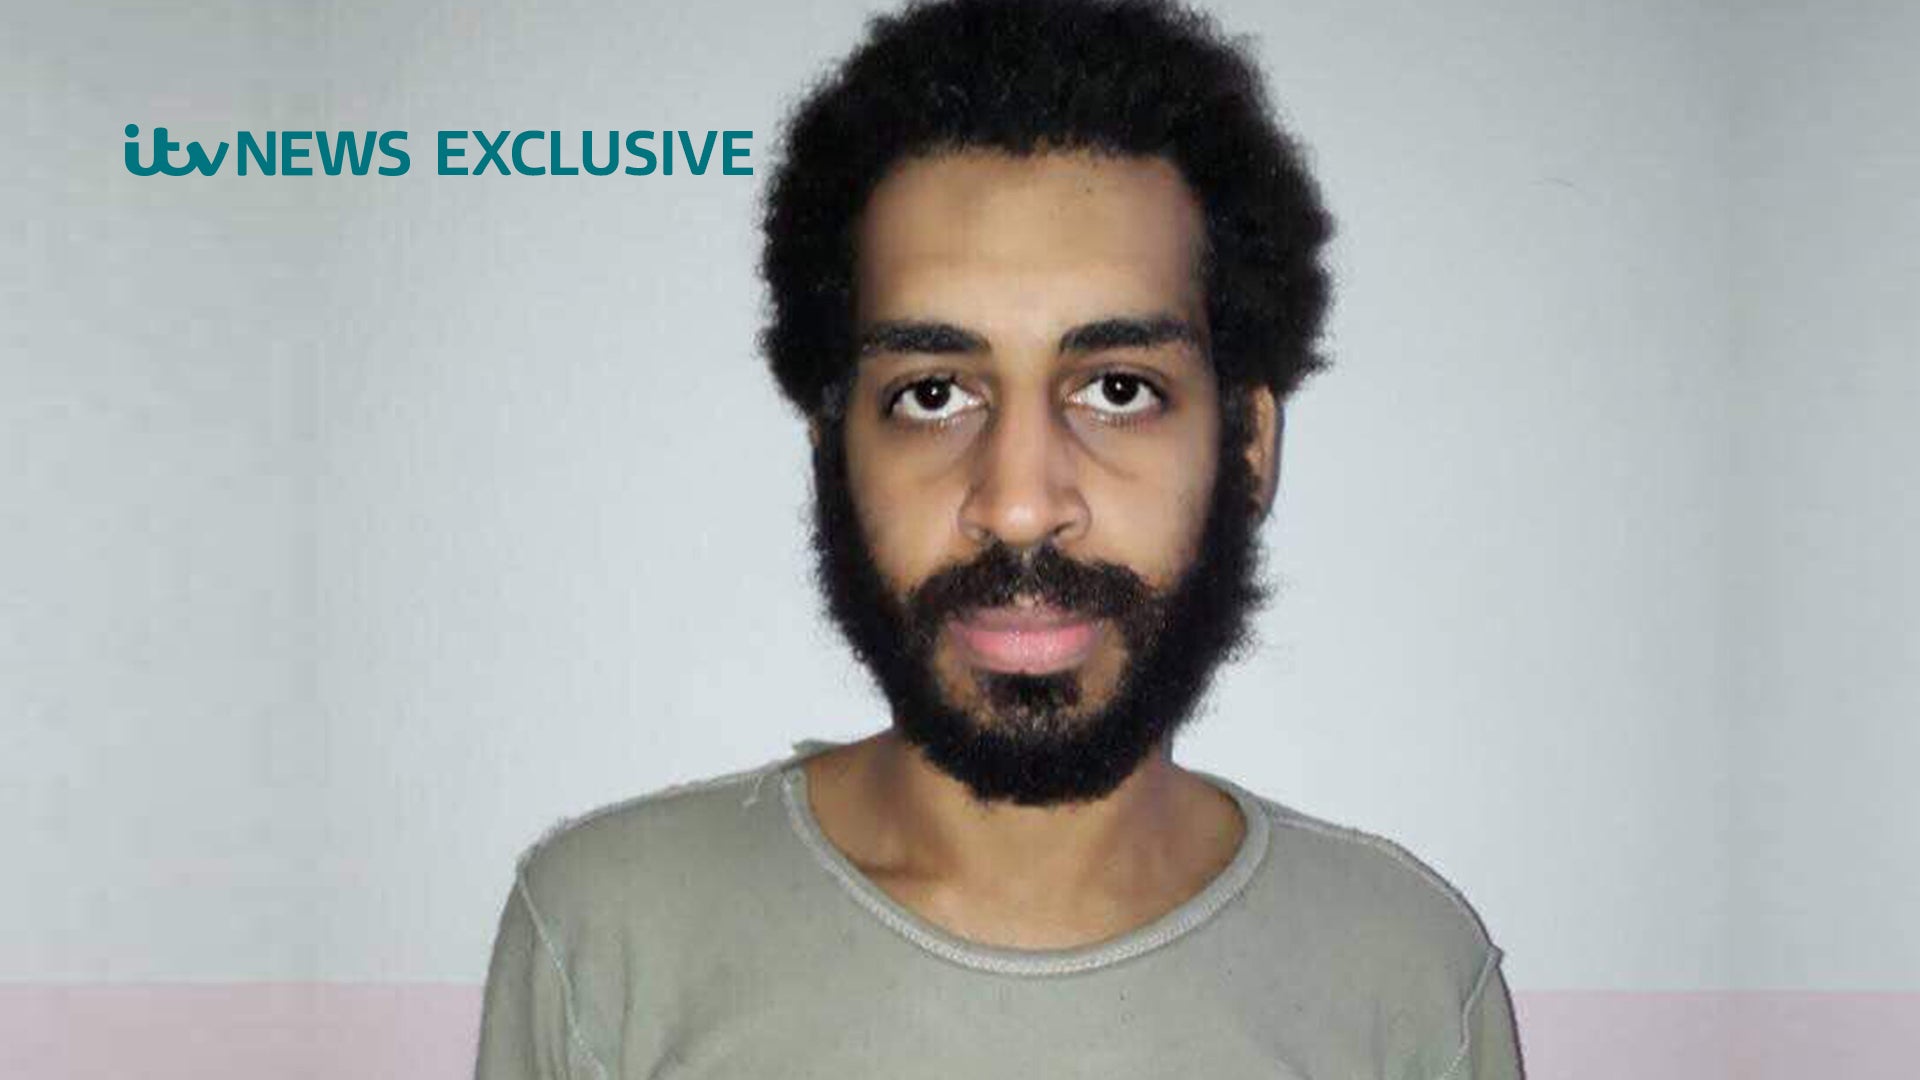 ISIS Beatle Alexanda Kotey is serving life in a US prison